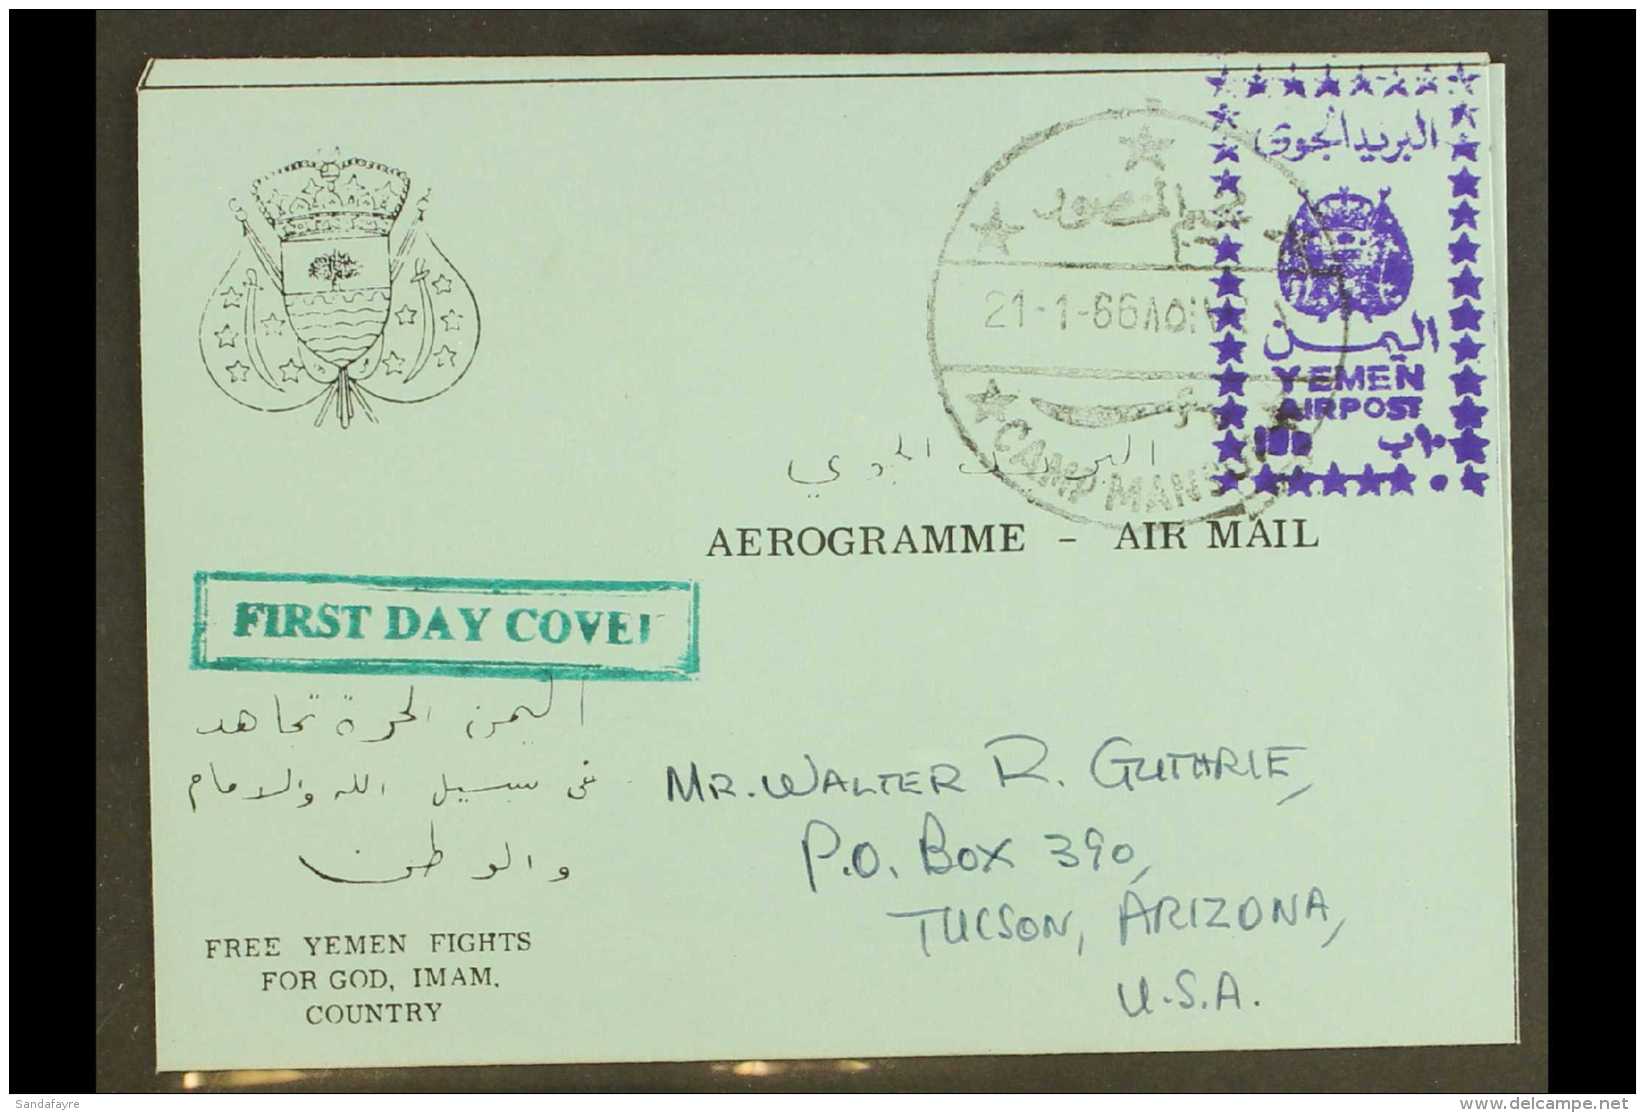 ROYALIST 1966 (21 Jan) 10b Violet Handstamp (as SG R130/134) On Blue Aerogramme Addressed To The USA And Cancelled... - Yemen